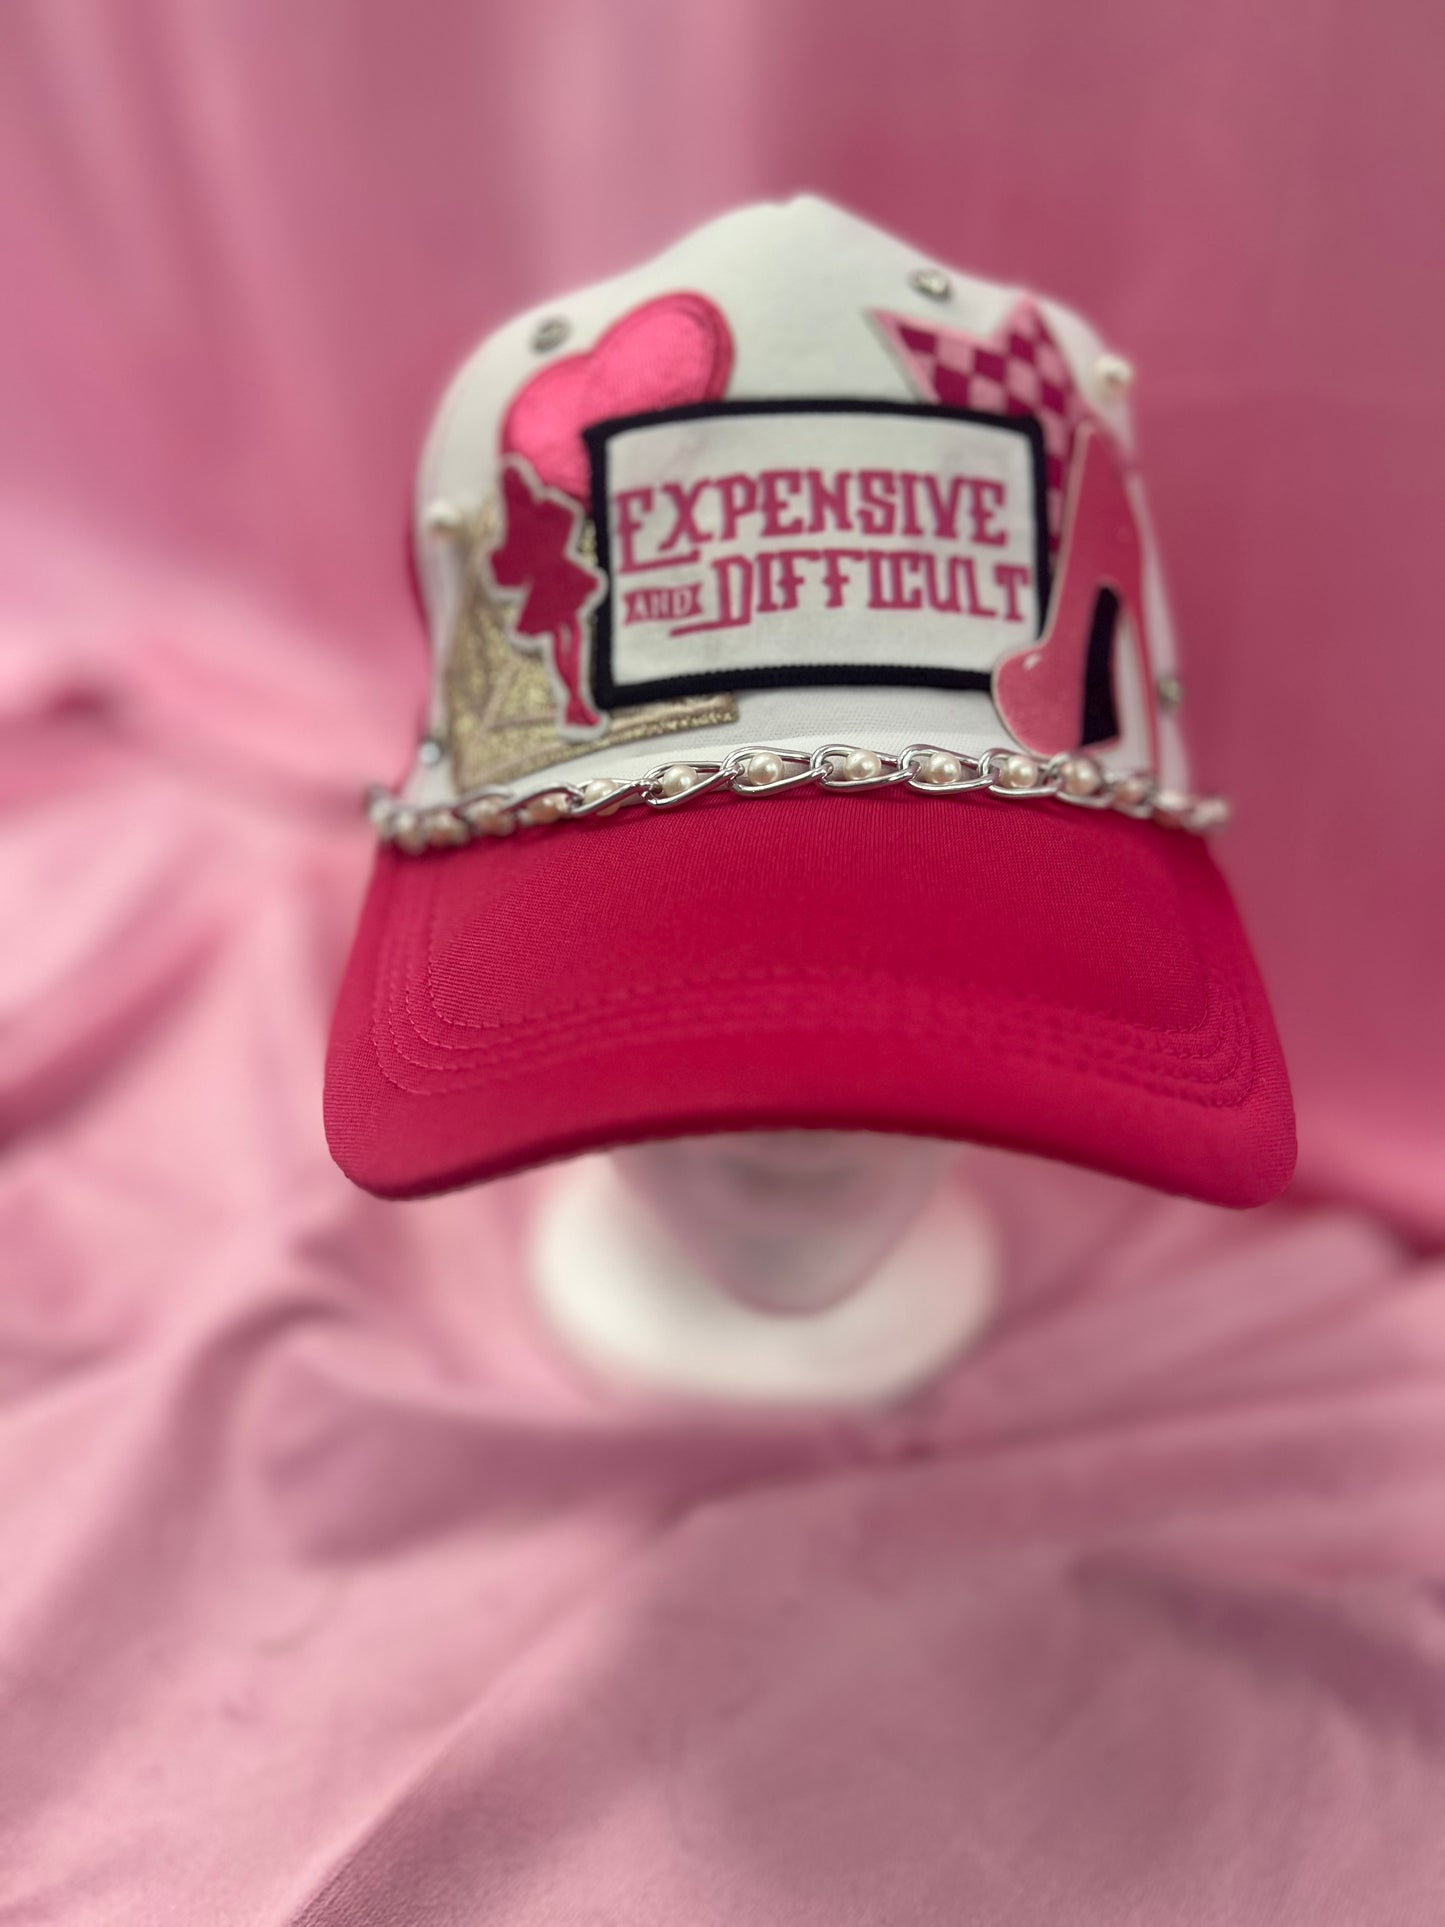 Expensive & Difficult | Custom Trucker Hat (Hot Pink)